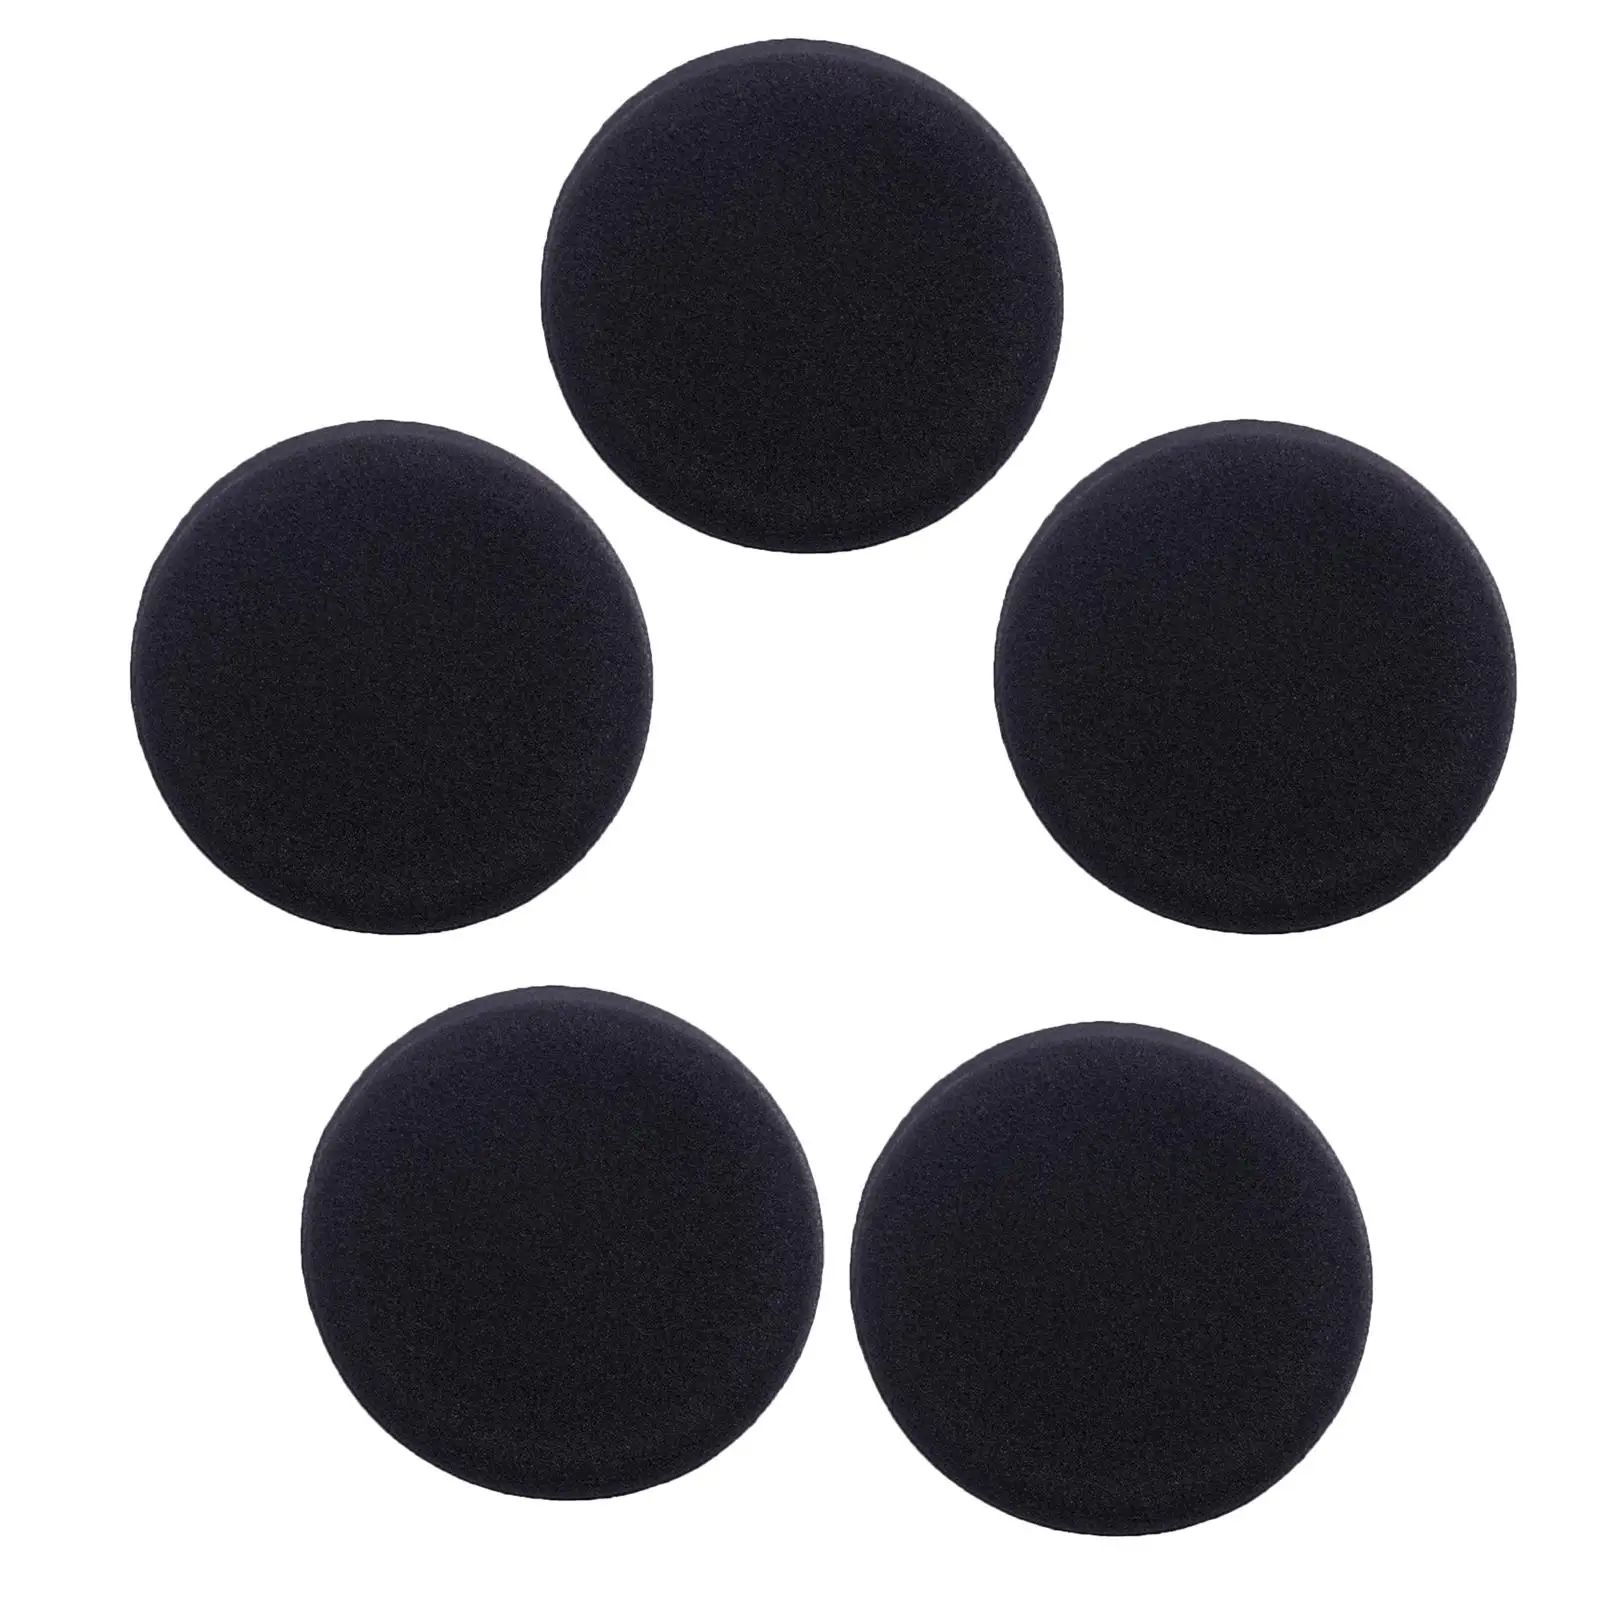 5Pcs Waxing Pads for Vehicle Buffing Sponge Pads Cleaning Tool Round Black